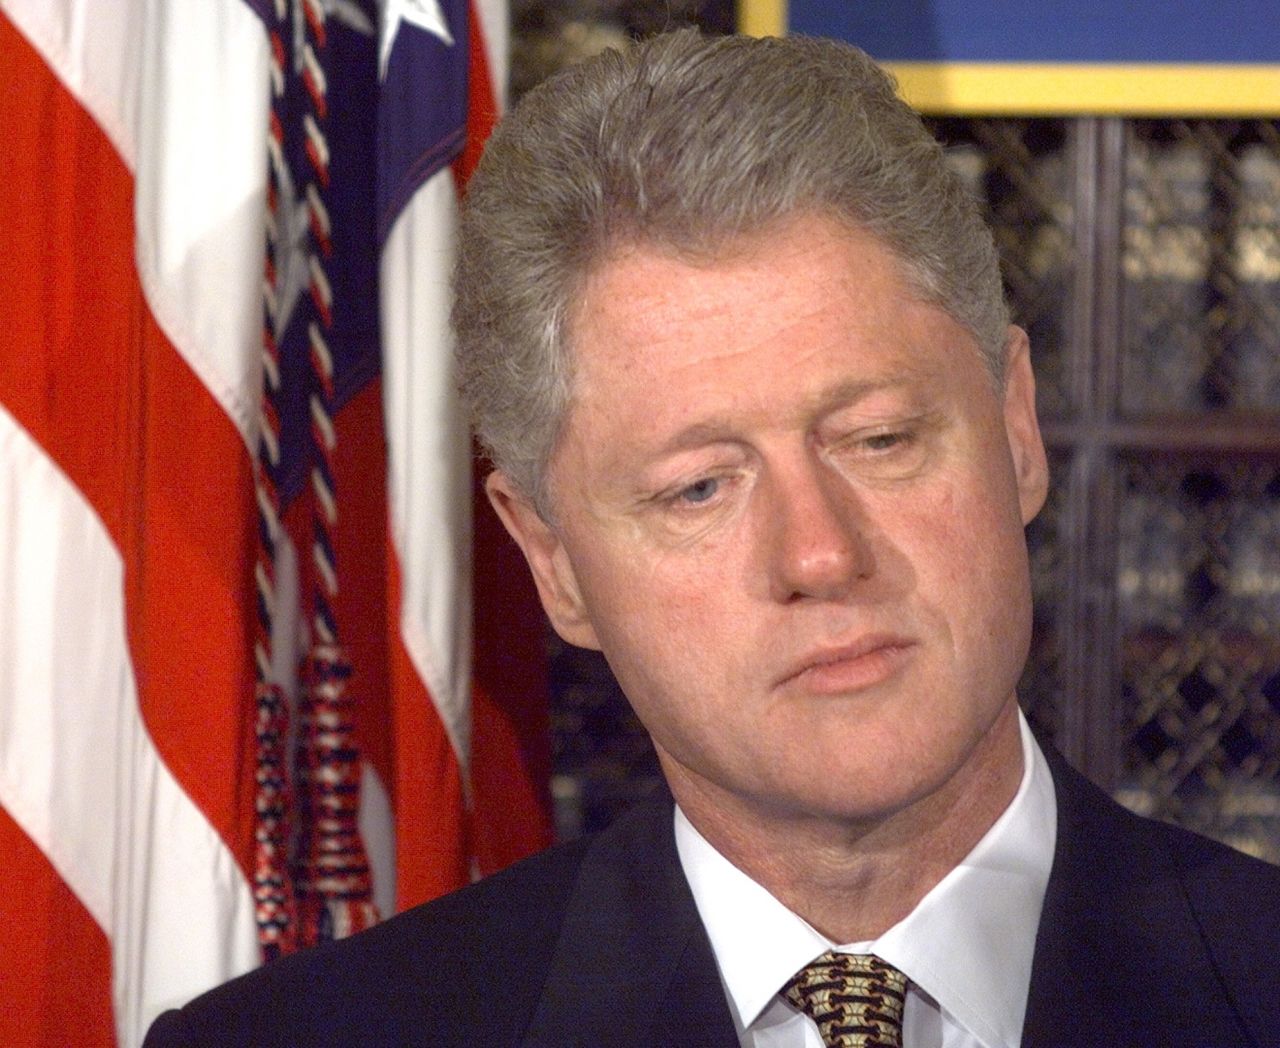 Former President Clinton stands to the side as he waits to be introduced at an event at the White House on October 8, 1998. Later that afternoon, the Republican House majority adopted a motion to launch an impeachment inquiry into Clinton's presidency.